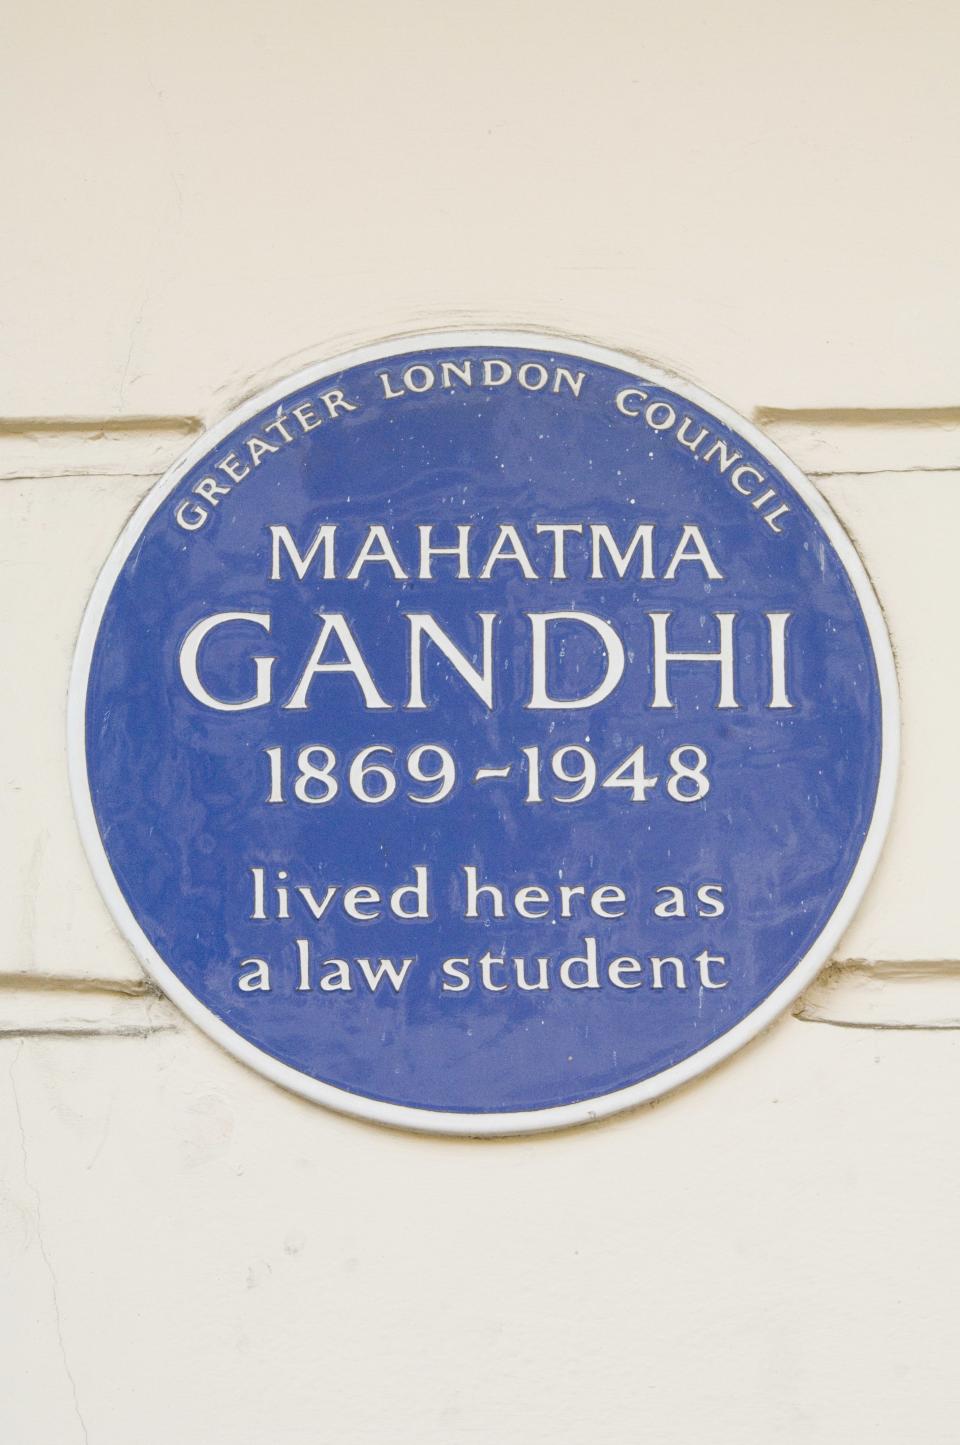 A blue plaque honors the home where Mahatma Gandhi lived as a law student. The building is located on 20 Baron’s Court Road in London.